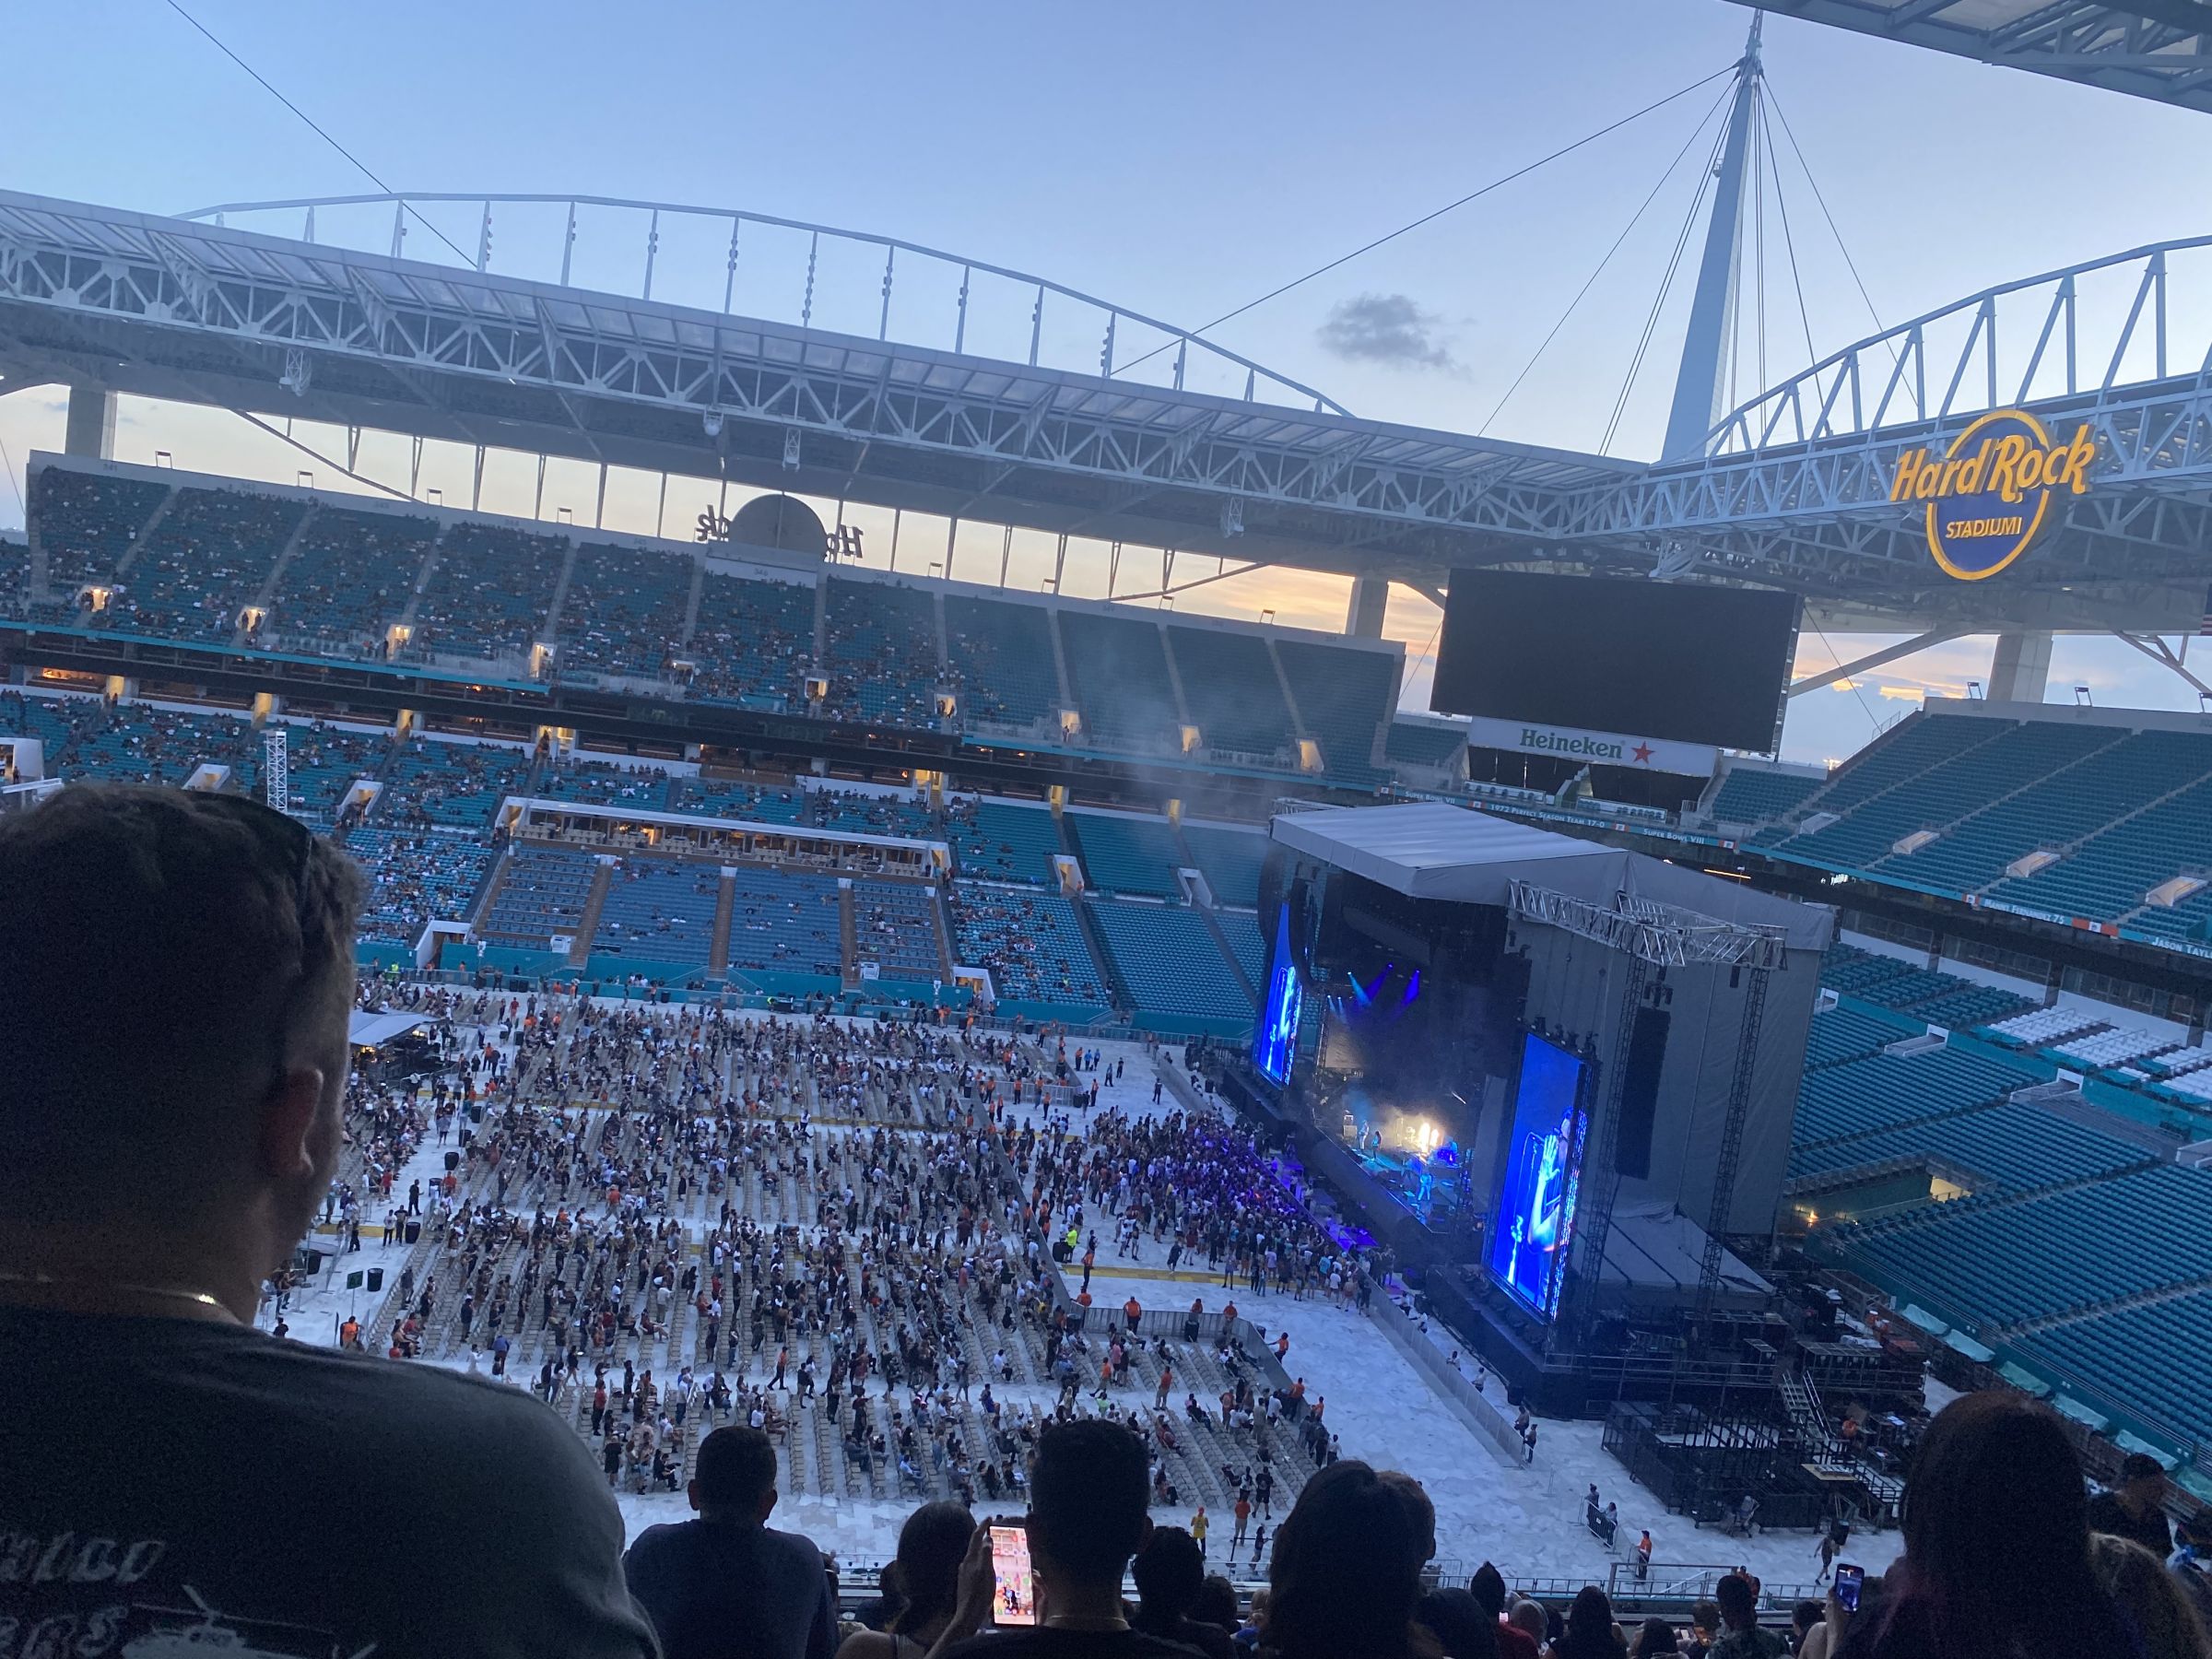 Hard Rock Stadium Seating Chart For Rolling Stones Concert Elcho Table